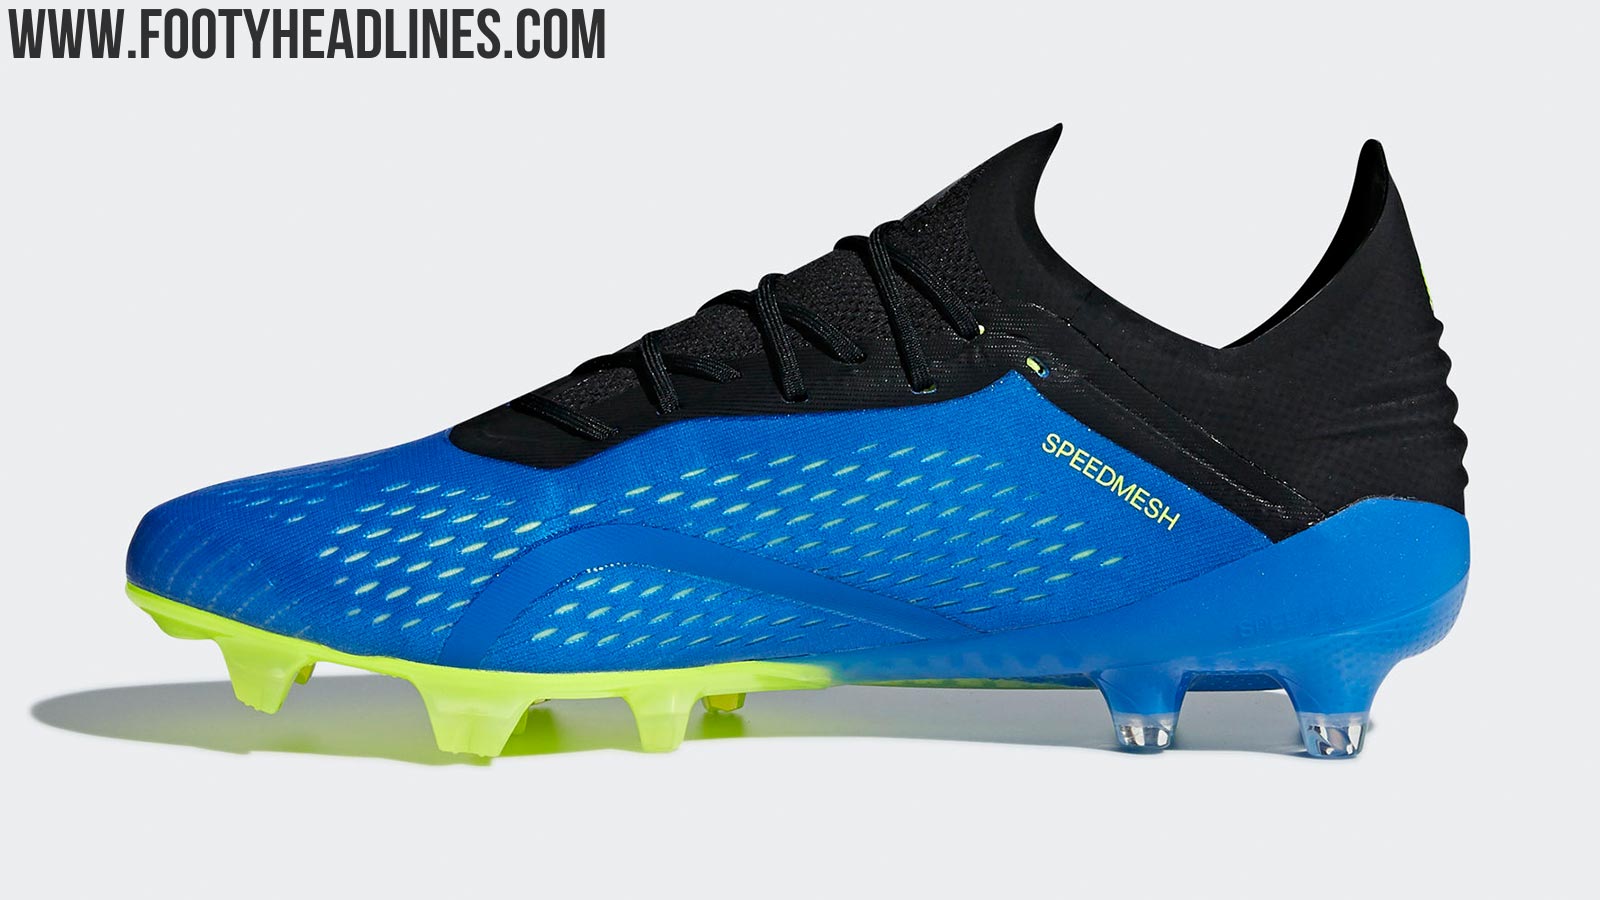 All-New Next-Gen Adidas X 18.1 'Energy Mode' Cup Boots Released - Footy Headlines